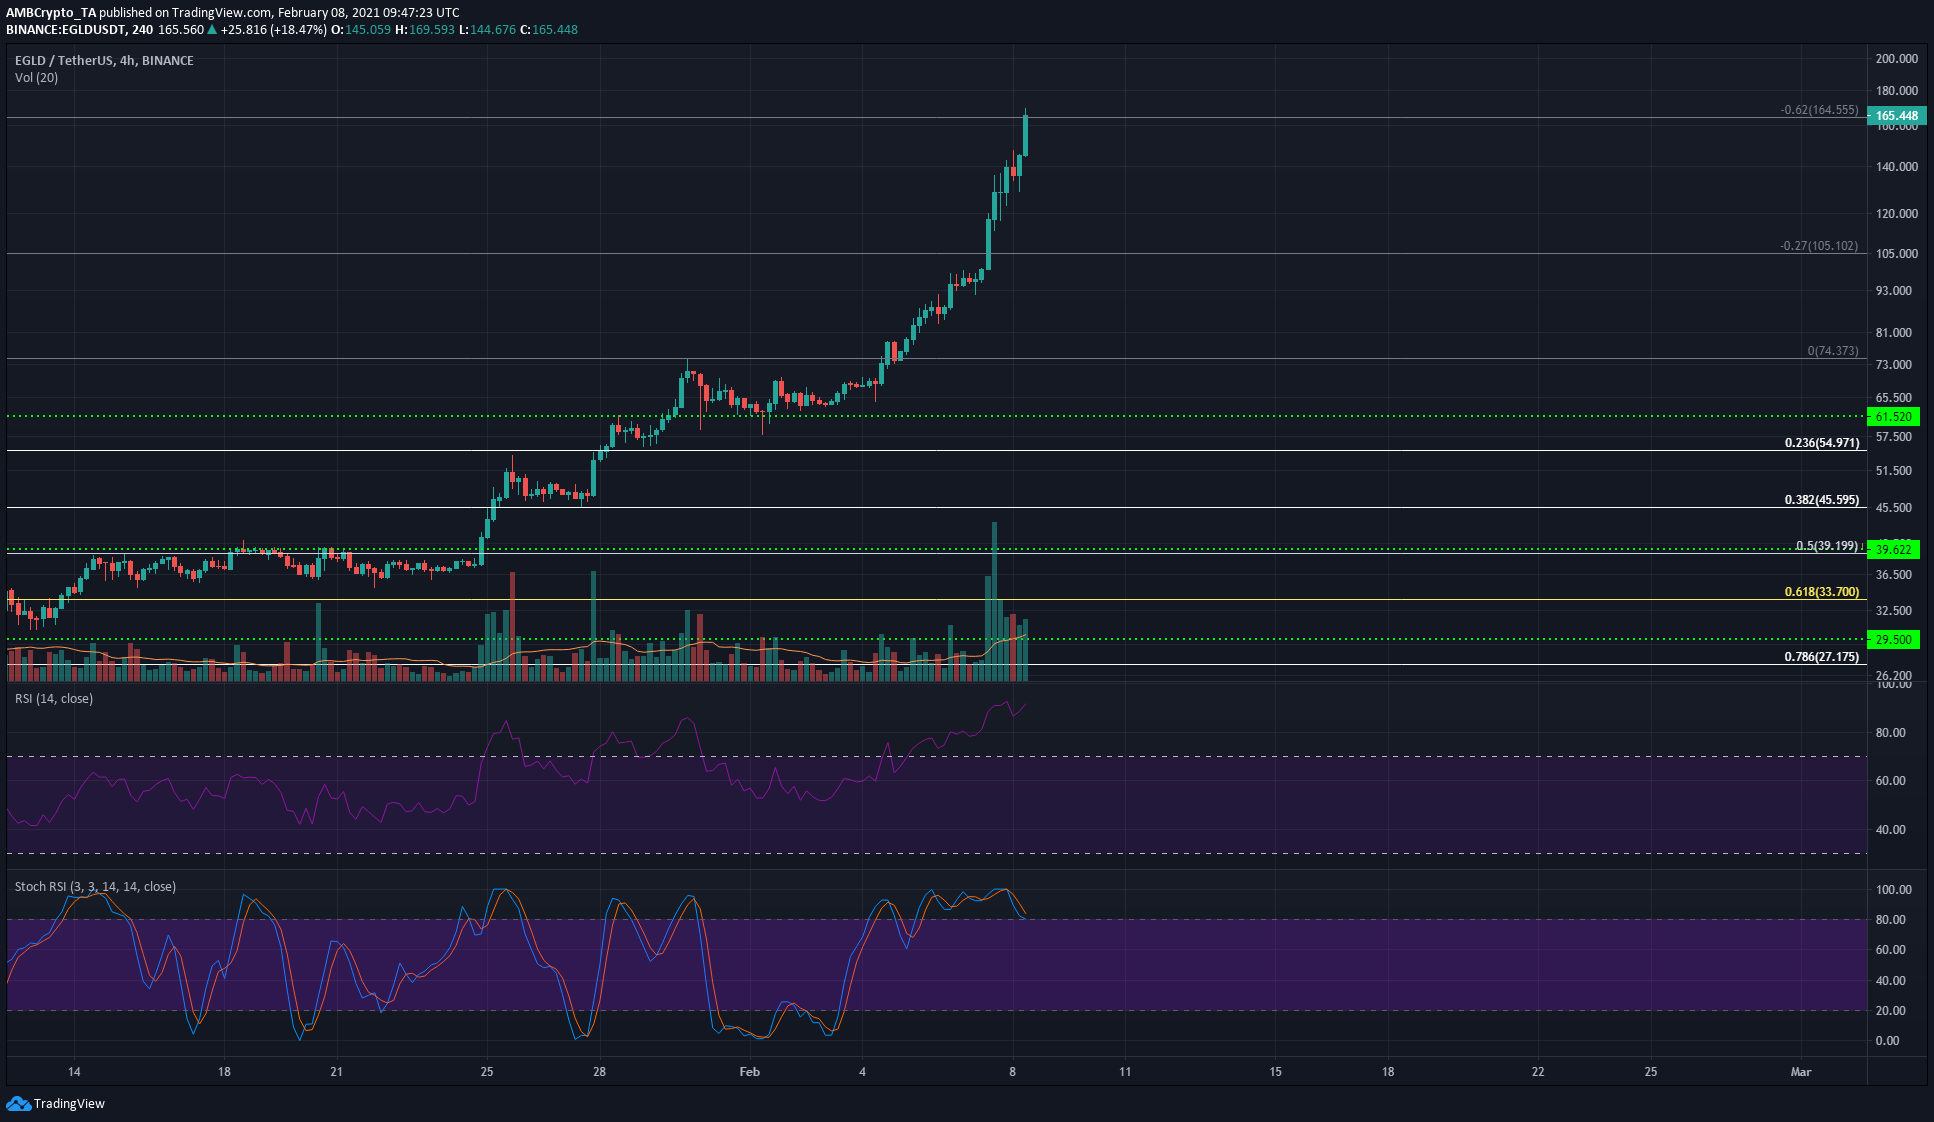 Chainlink, Aave, Elrond Price Analysis: 08 February